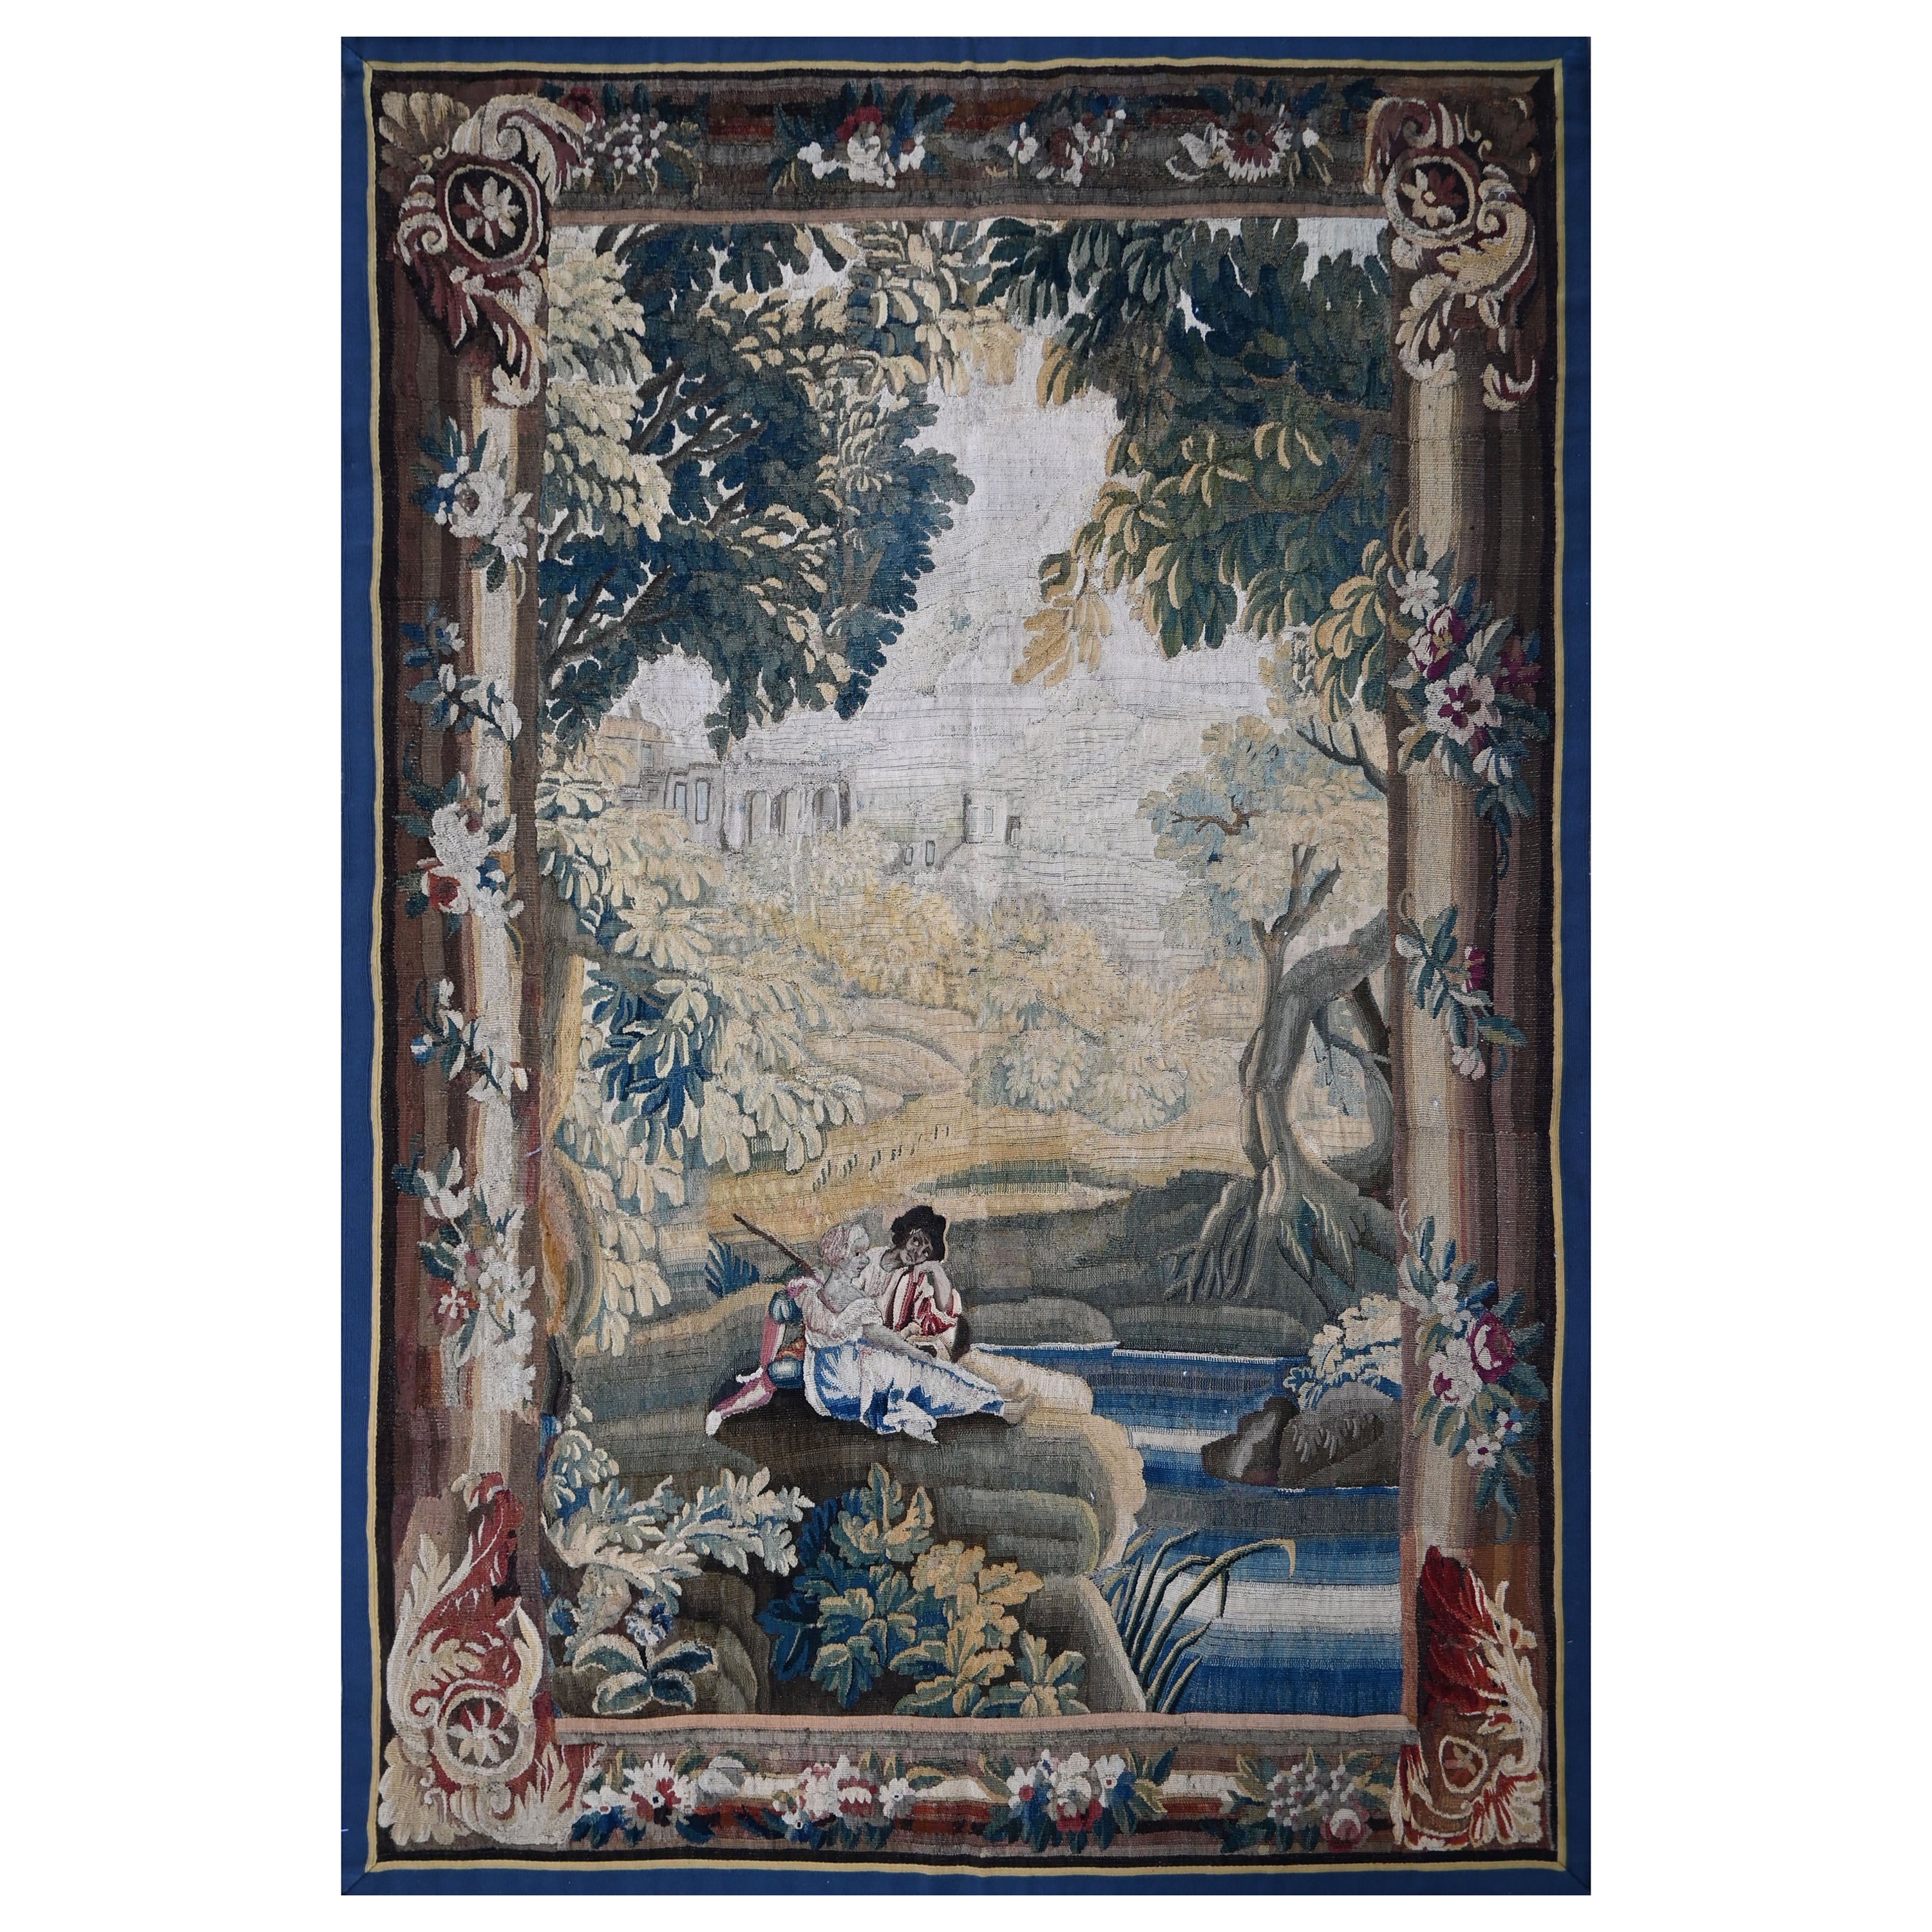 Aubusson Tapestry of 18th Century Aubusson, N° 1253